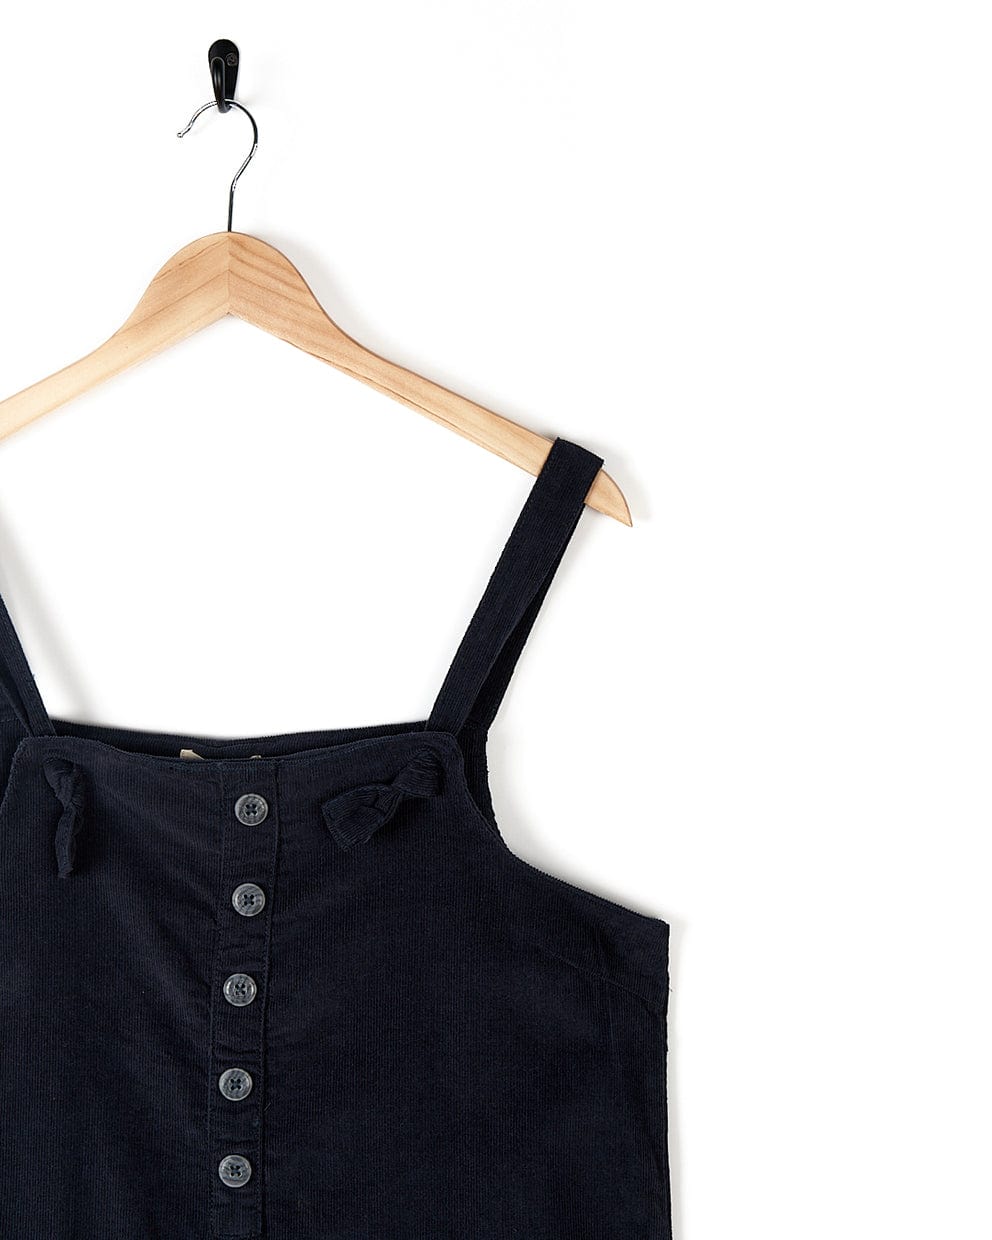 A Nancy - Womens Cord Jumpsuit - Dark Blue by Saltrock with buttons down the front, hanging on a wooden hanger against a white background—perfect for the fashion-conscious woman.